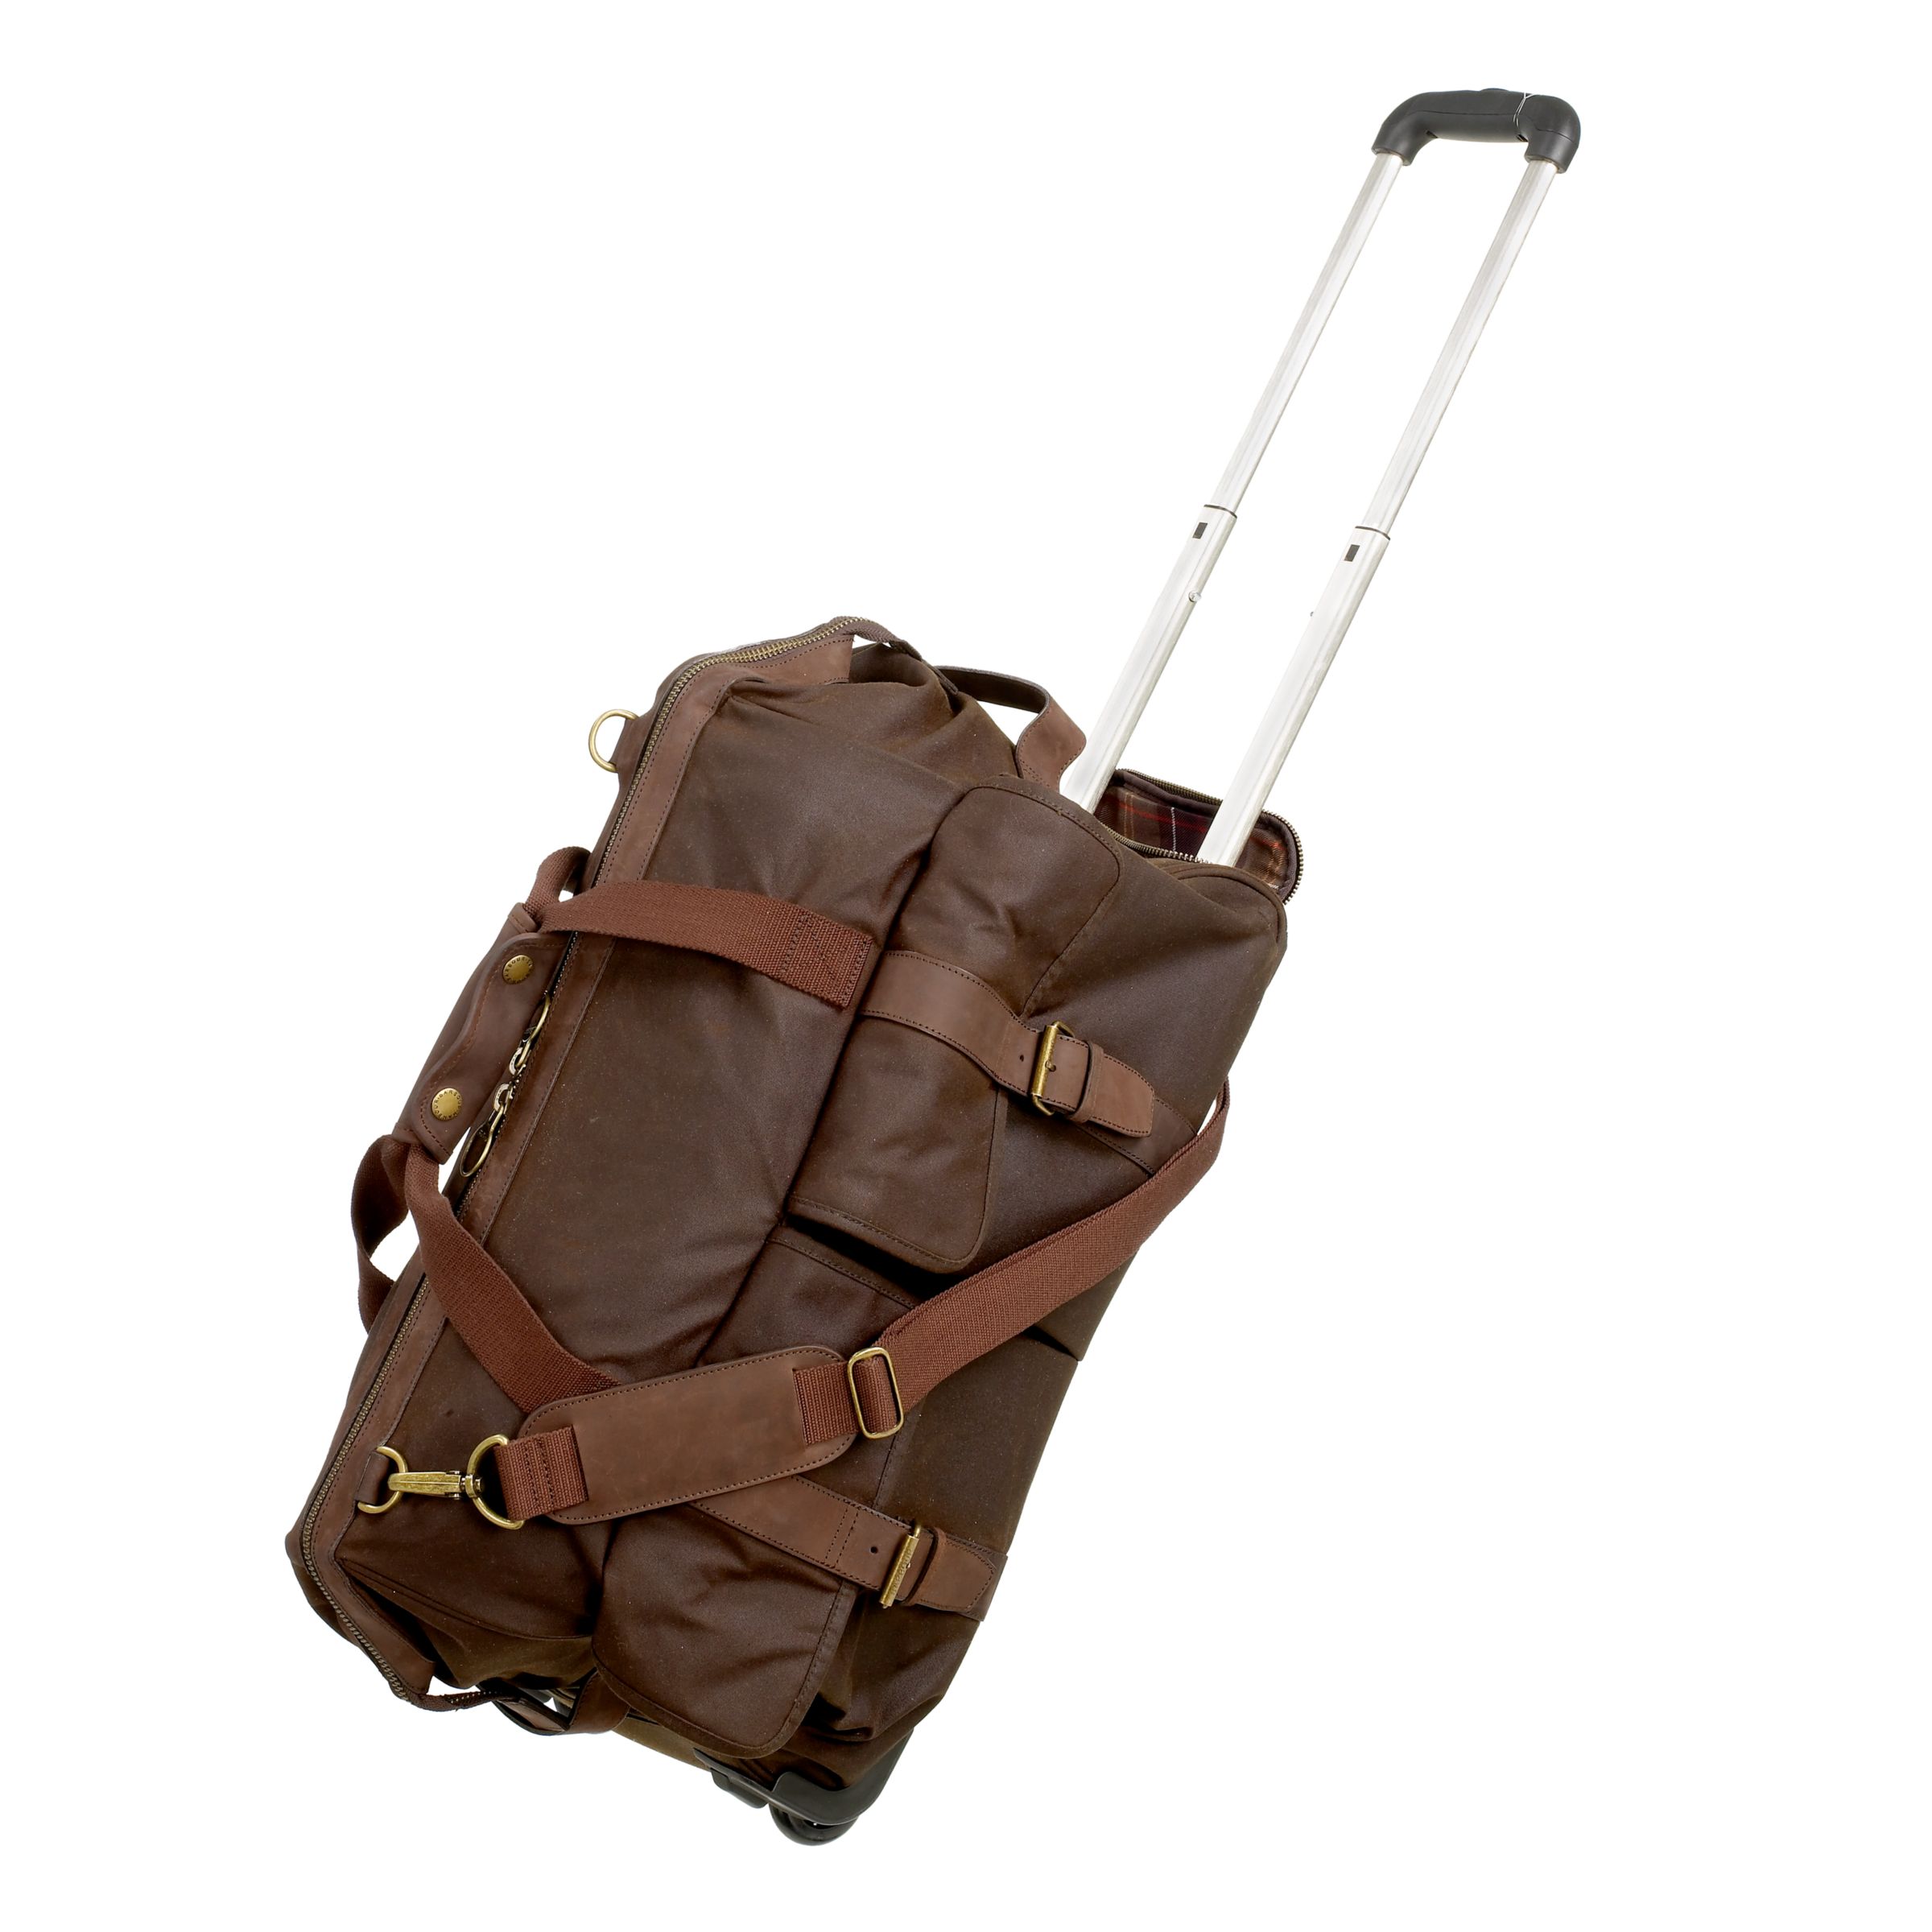 Barbour Waxed Cotton 2-Wheel Holdall, Dark brown at John Lewis